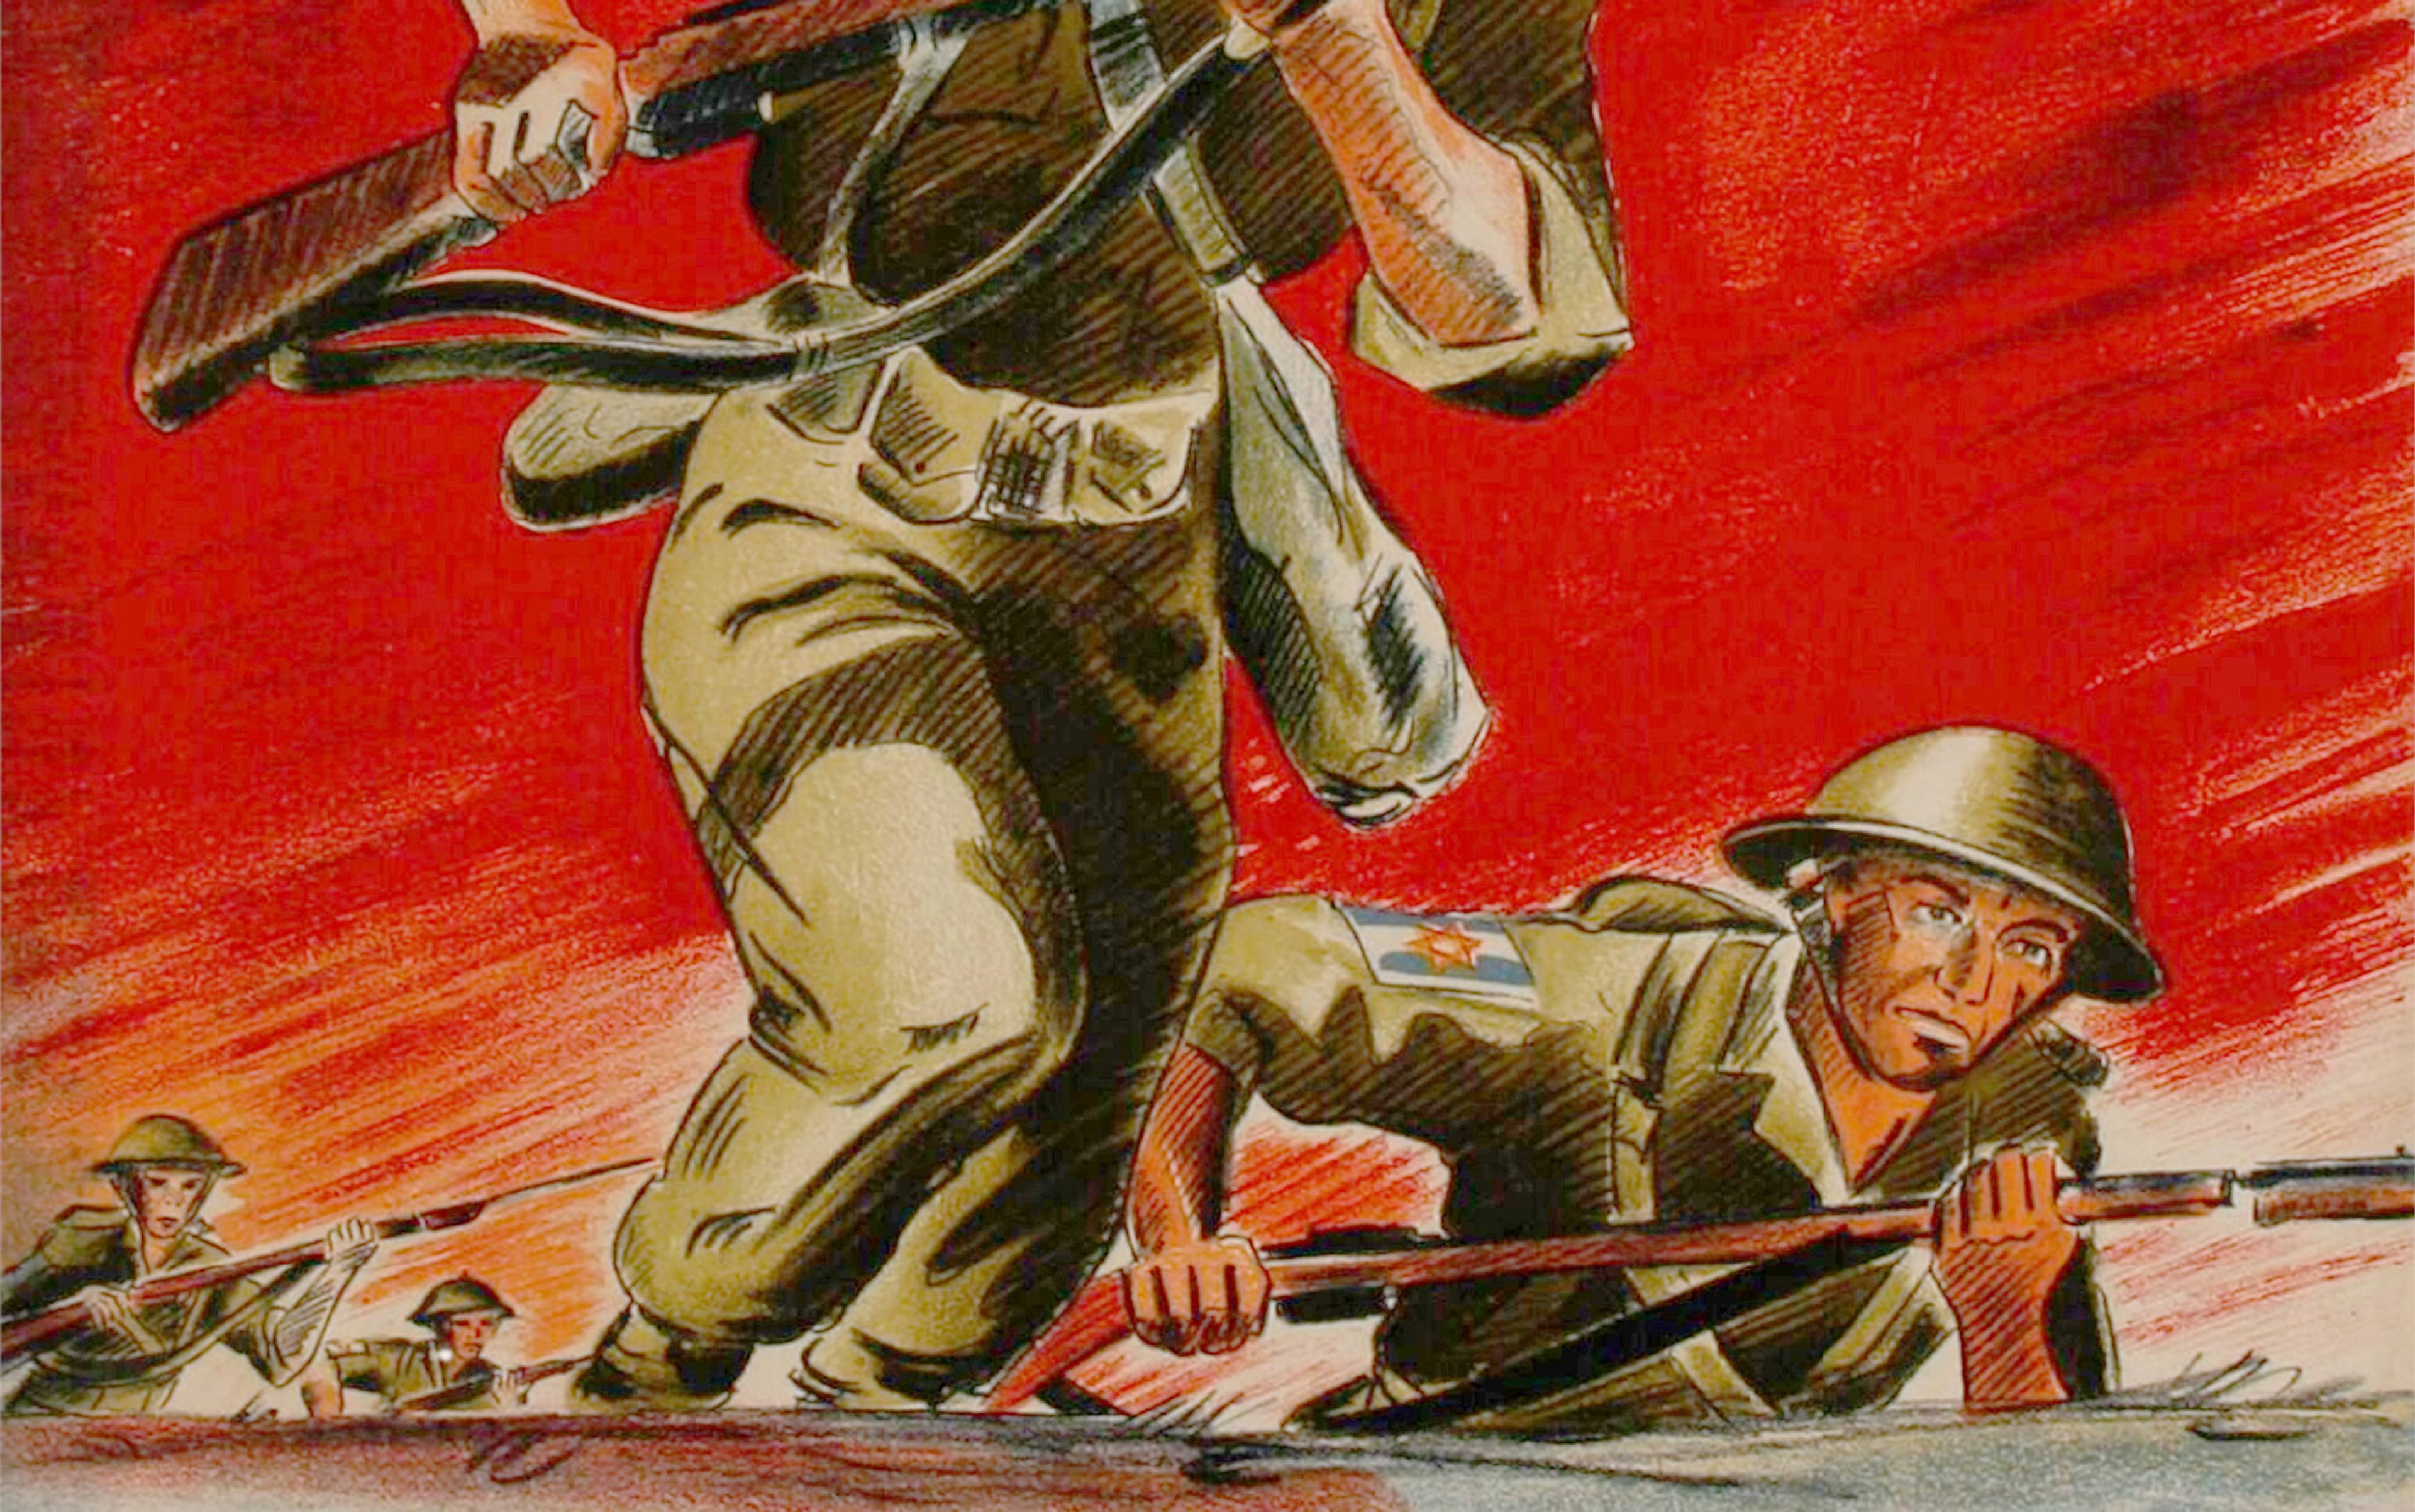 Illustration of soldiers in action, with one leading the charge and another crawling forward. Both wear military uniforms with helmets and carry rifles. The background is a vibrant red, enhancing the sense of urgency and movement.